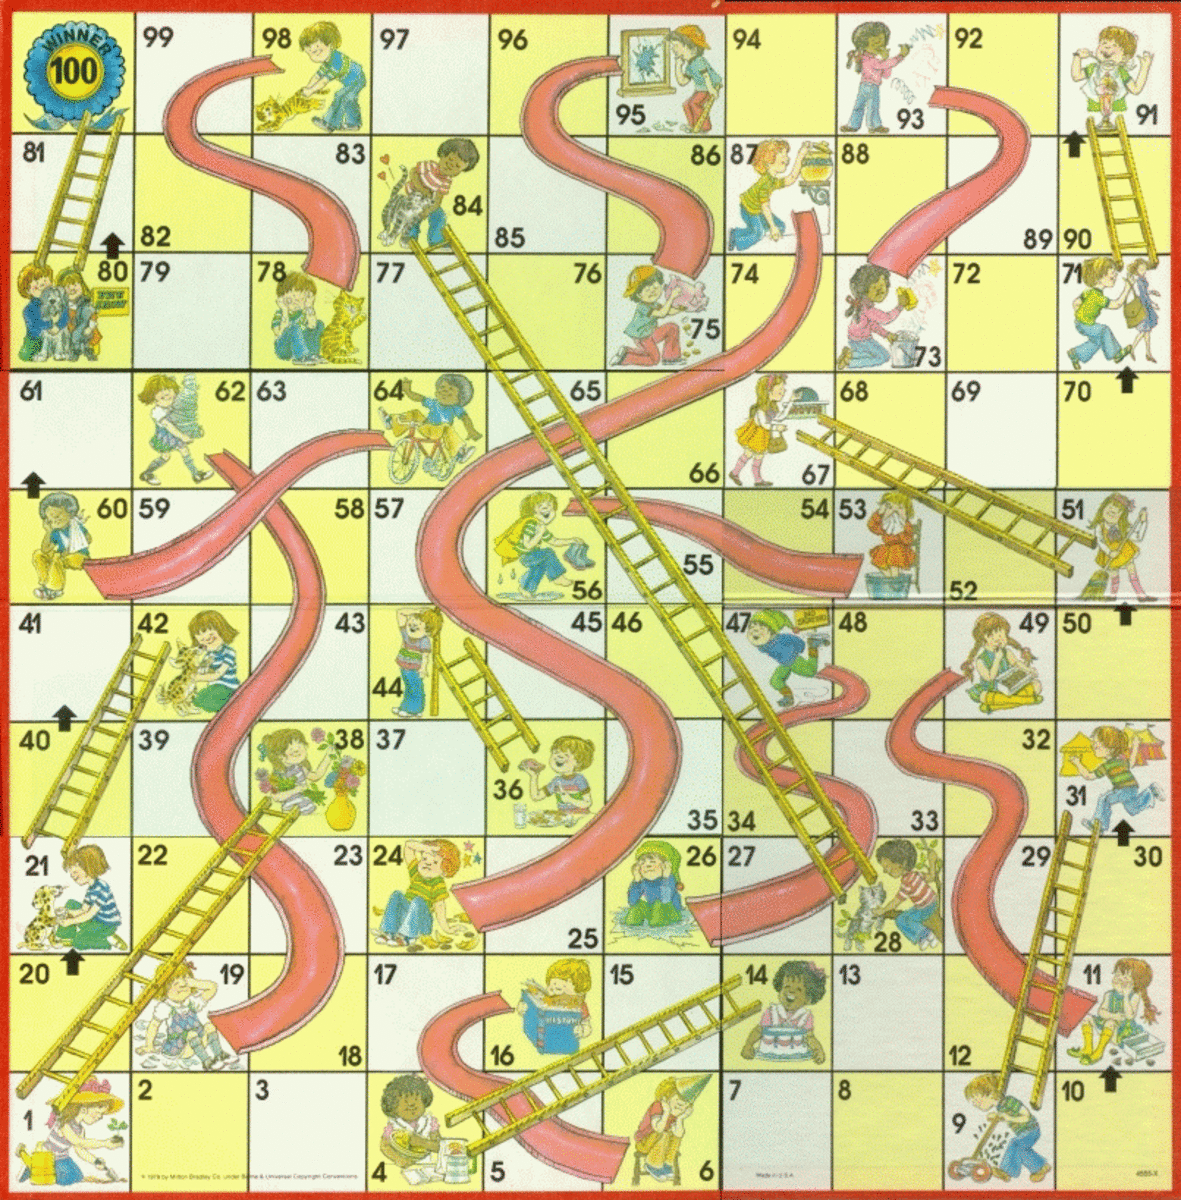 This older version of the Milton Bradley version of chutes and ladders shows a board with numbered game spaces. Click on the photo to see a full-sized version of the image.